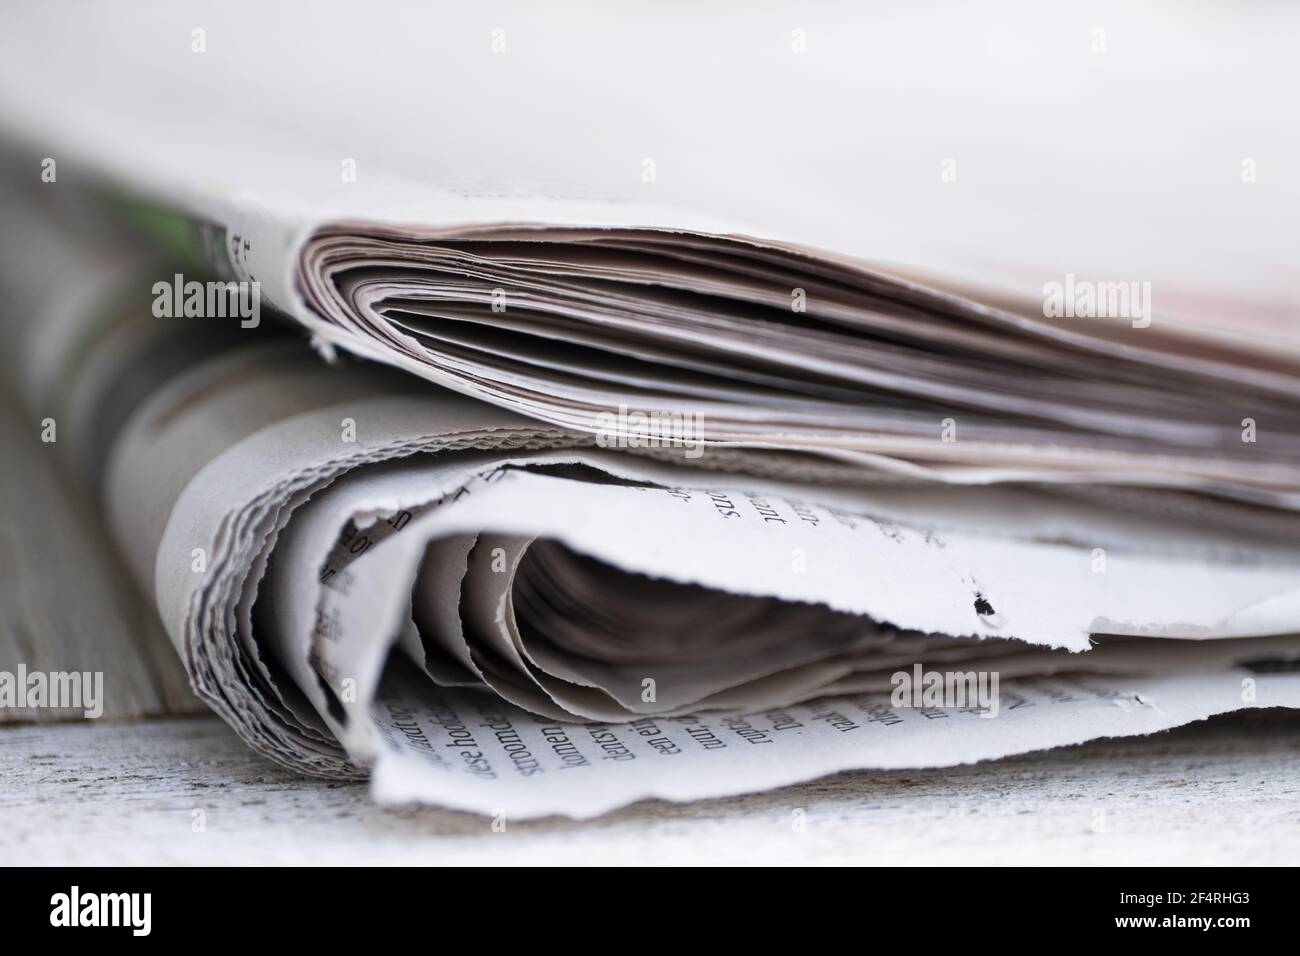 Folded newspapers with almost unreadable Dutch text on a table against plain background with narrow depth of field Stock Photo